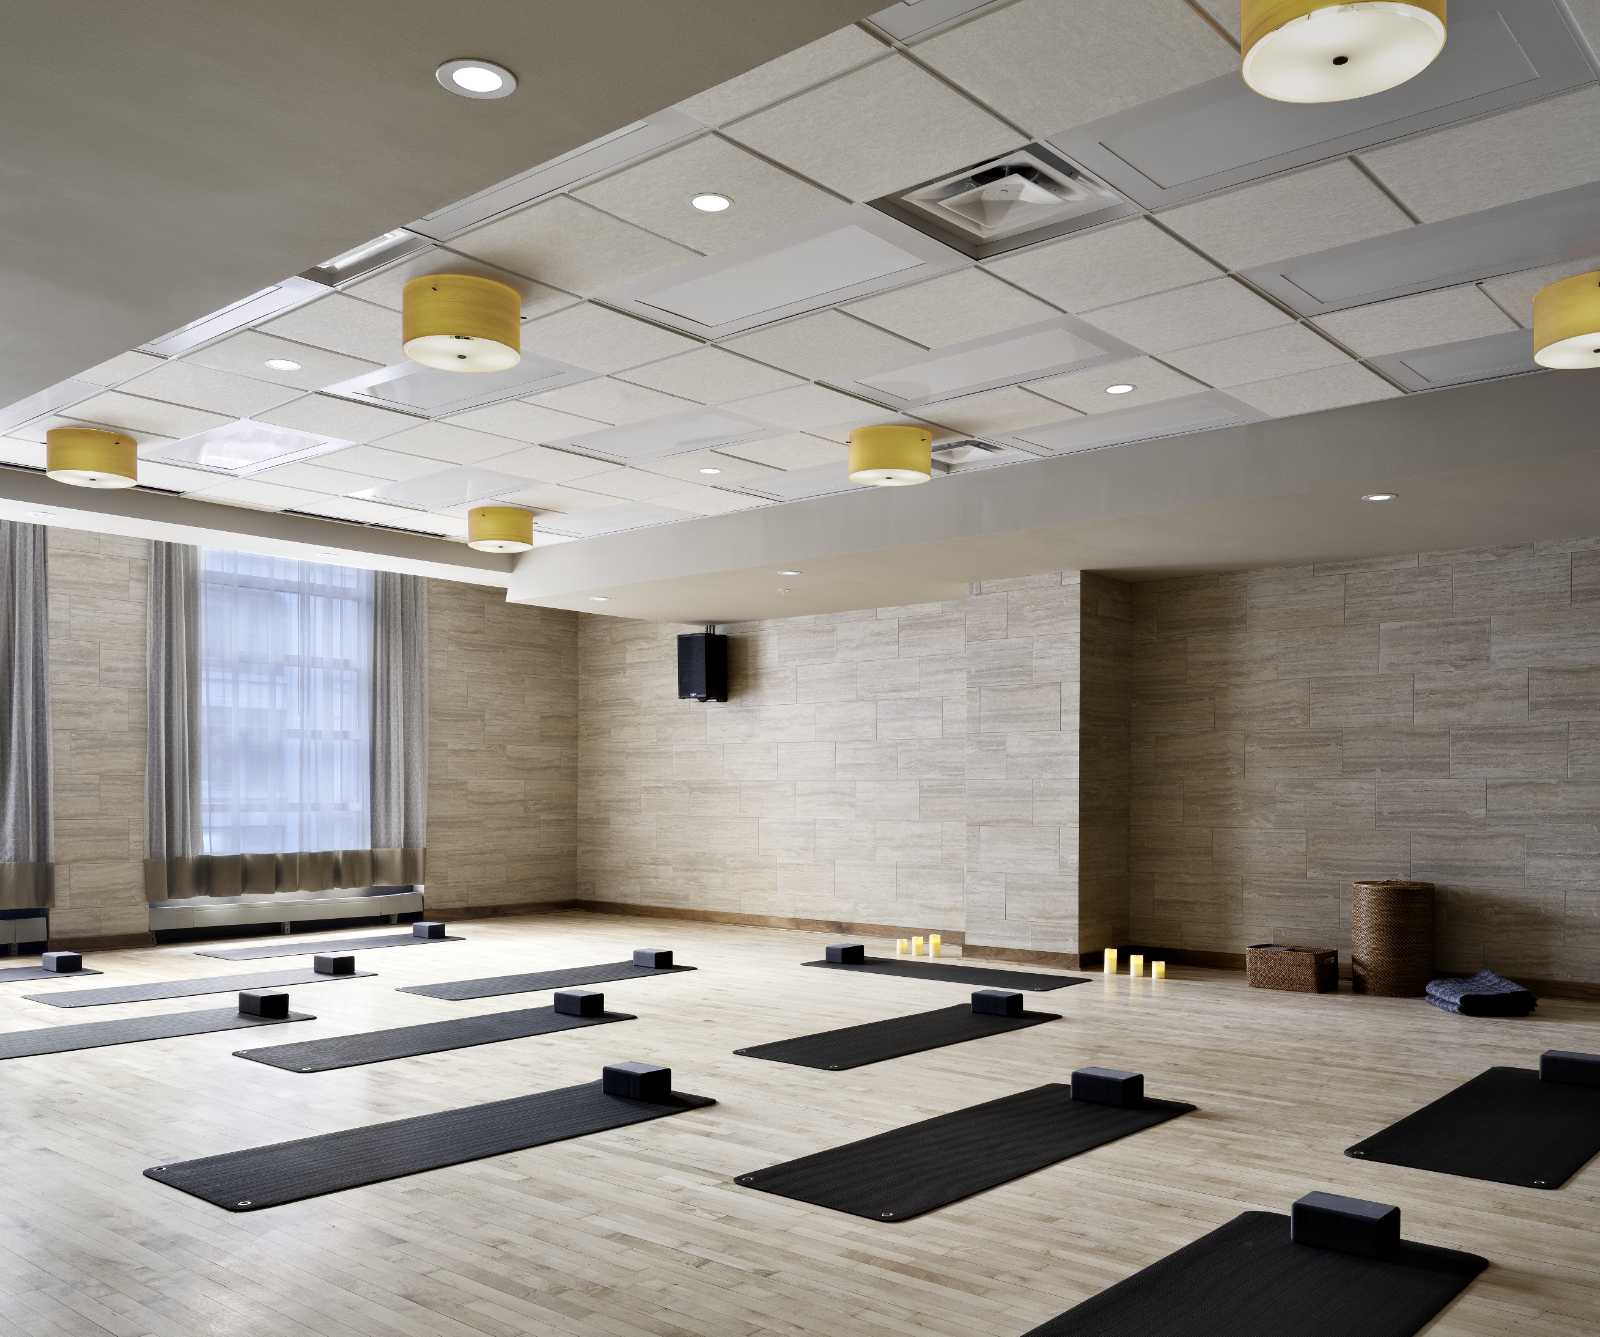 A bright studio classroom with yoga mats and yoga bricks laid out